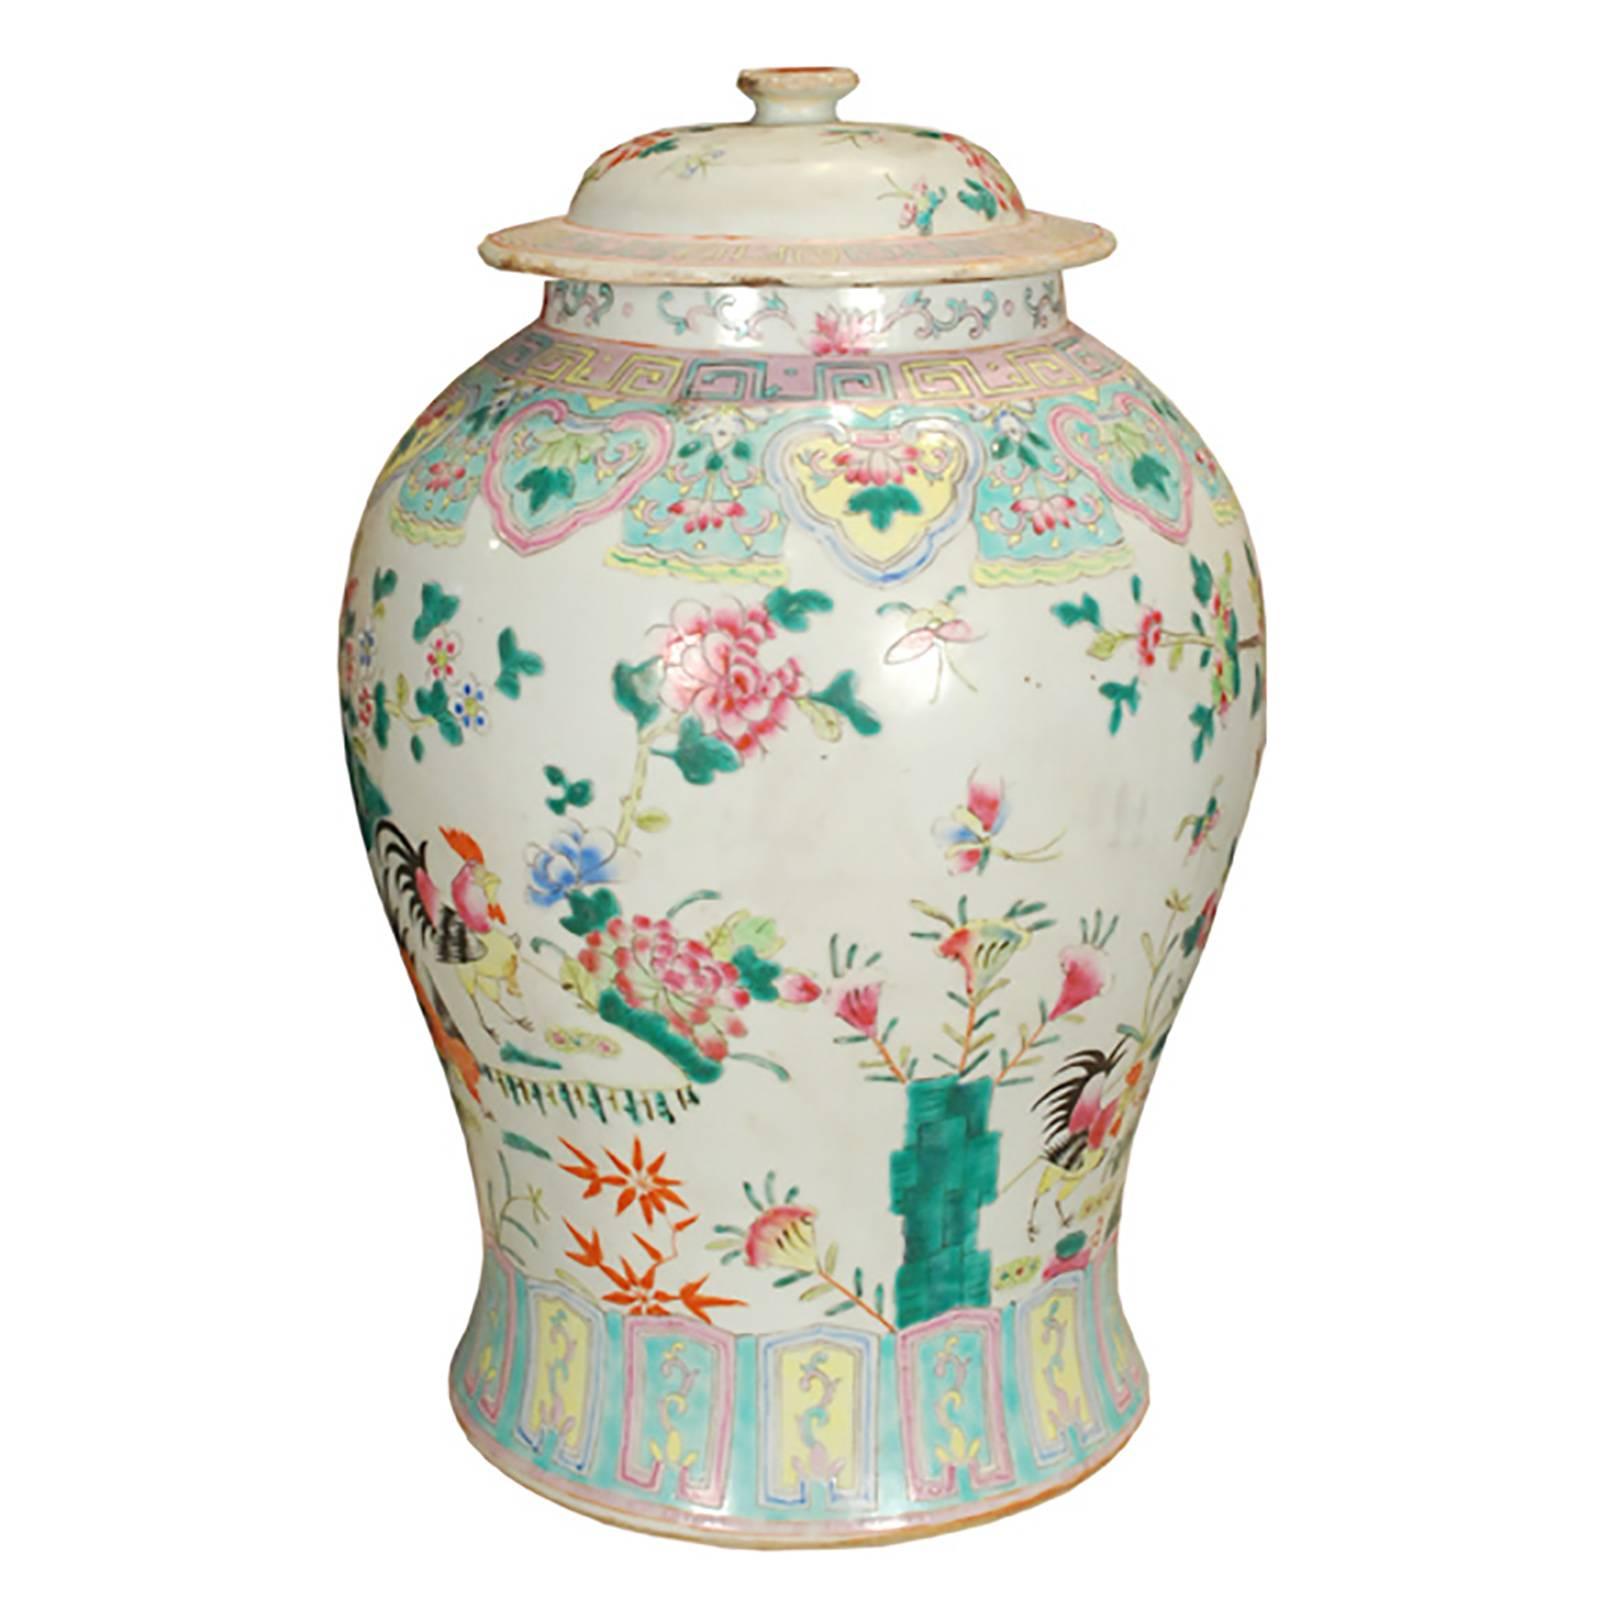 This overglazed porcelain jar from southern China was painted by hand at the turn of the century with roosters in a flowering garden, representing the charms of rural life. This intricate and colorful style of porcelain gained popularity in the